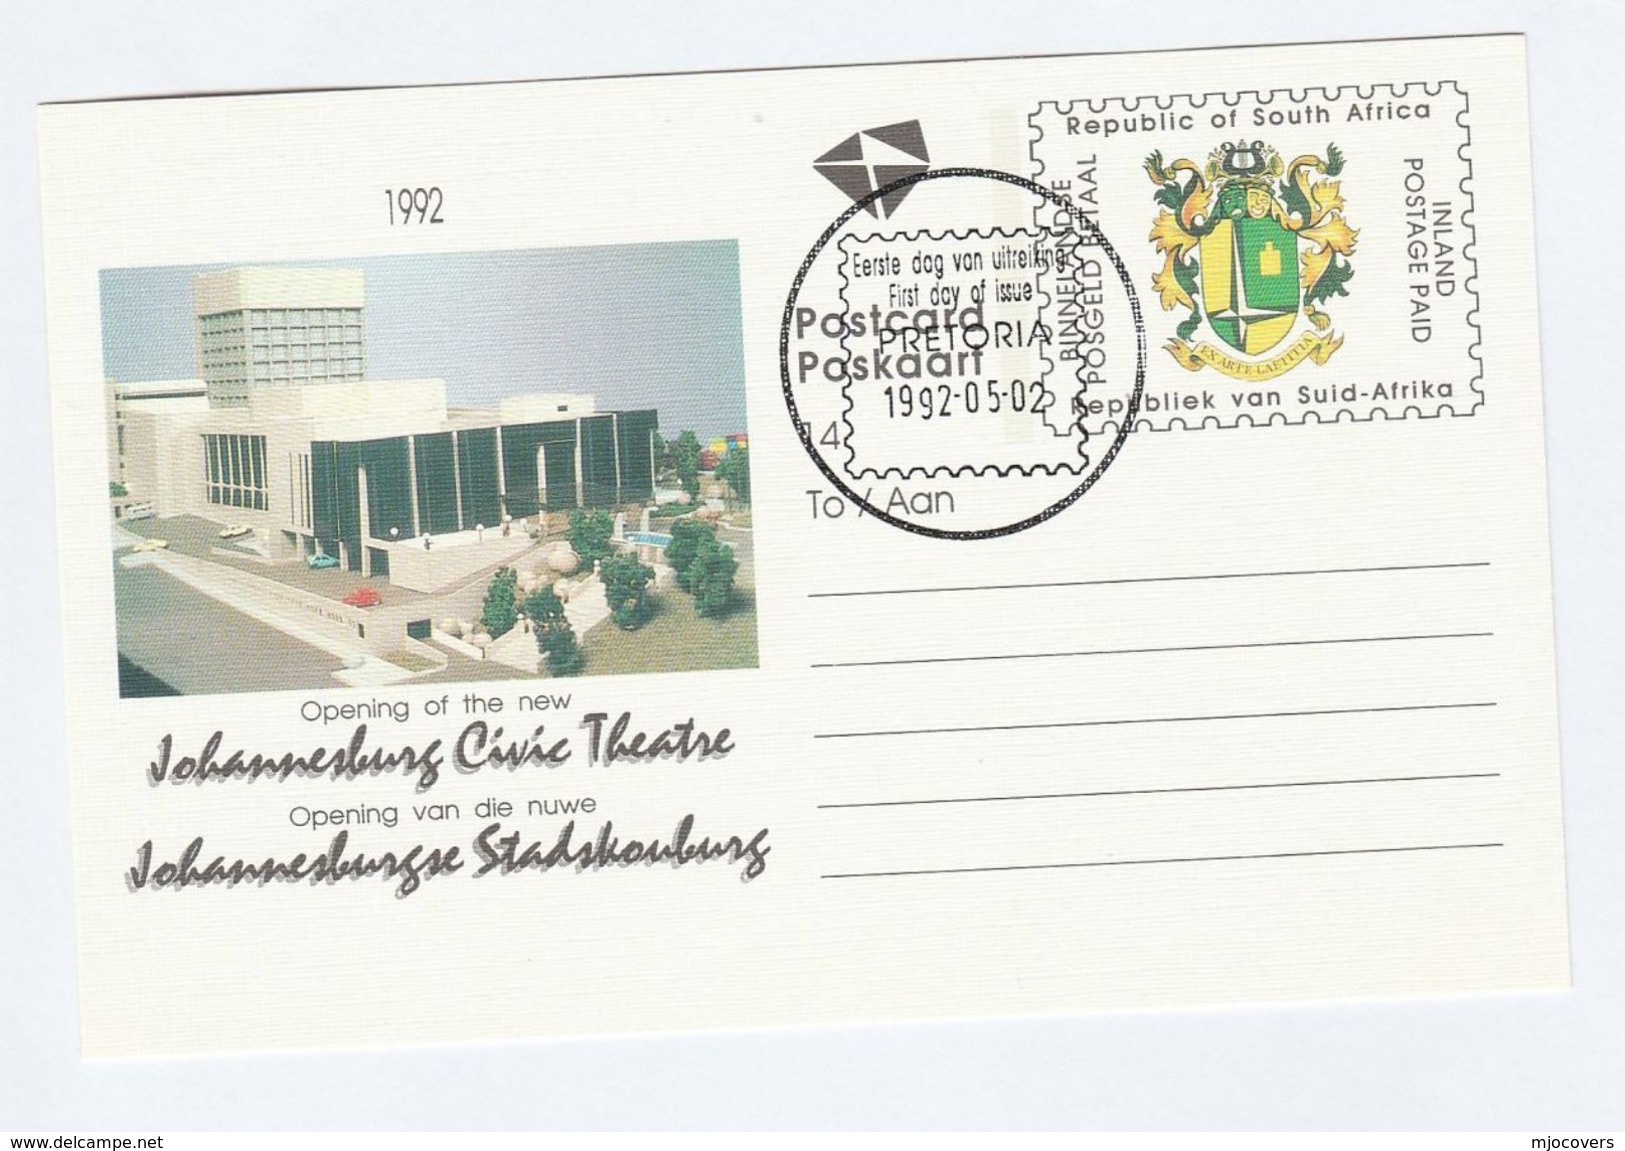 1992 SOUTH AFRICA STATIONERY Illus CIVIC THEATRE At JOHANNESBURG , FIRST DAY Rsa Stamps Postal Card Cover - Cartas & Documentos